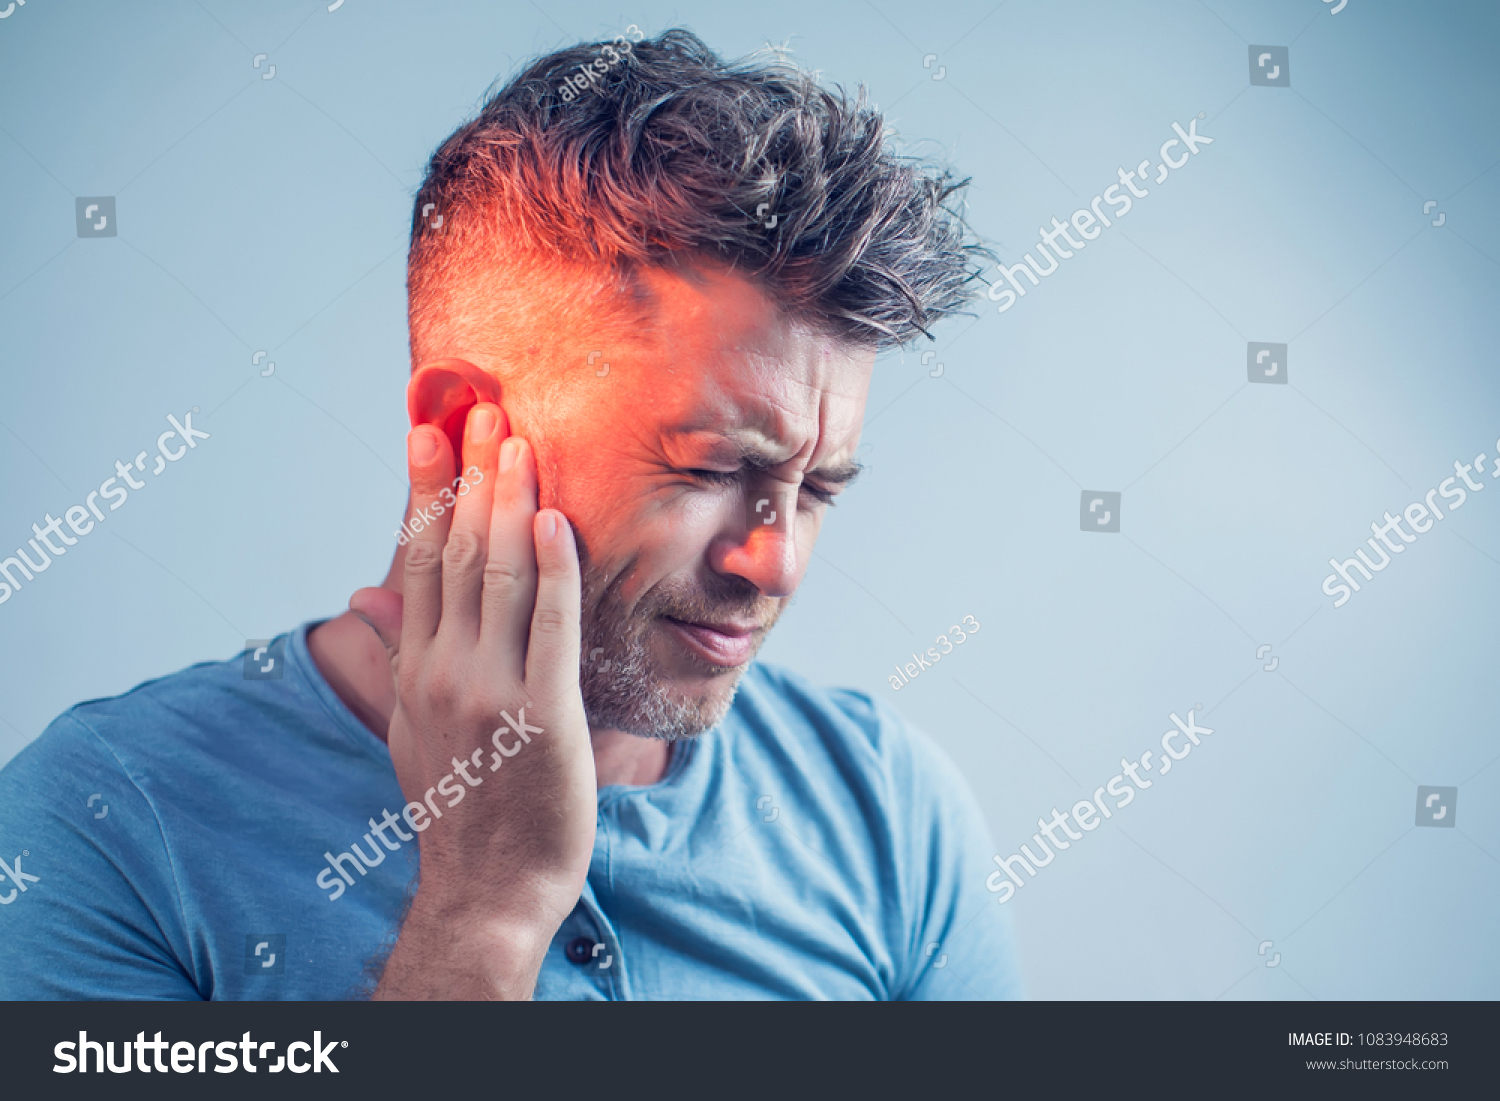 male having ear pain touching his painful head isolated on gray background #1083948683